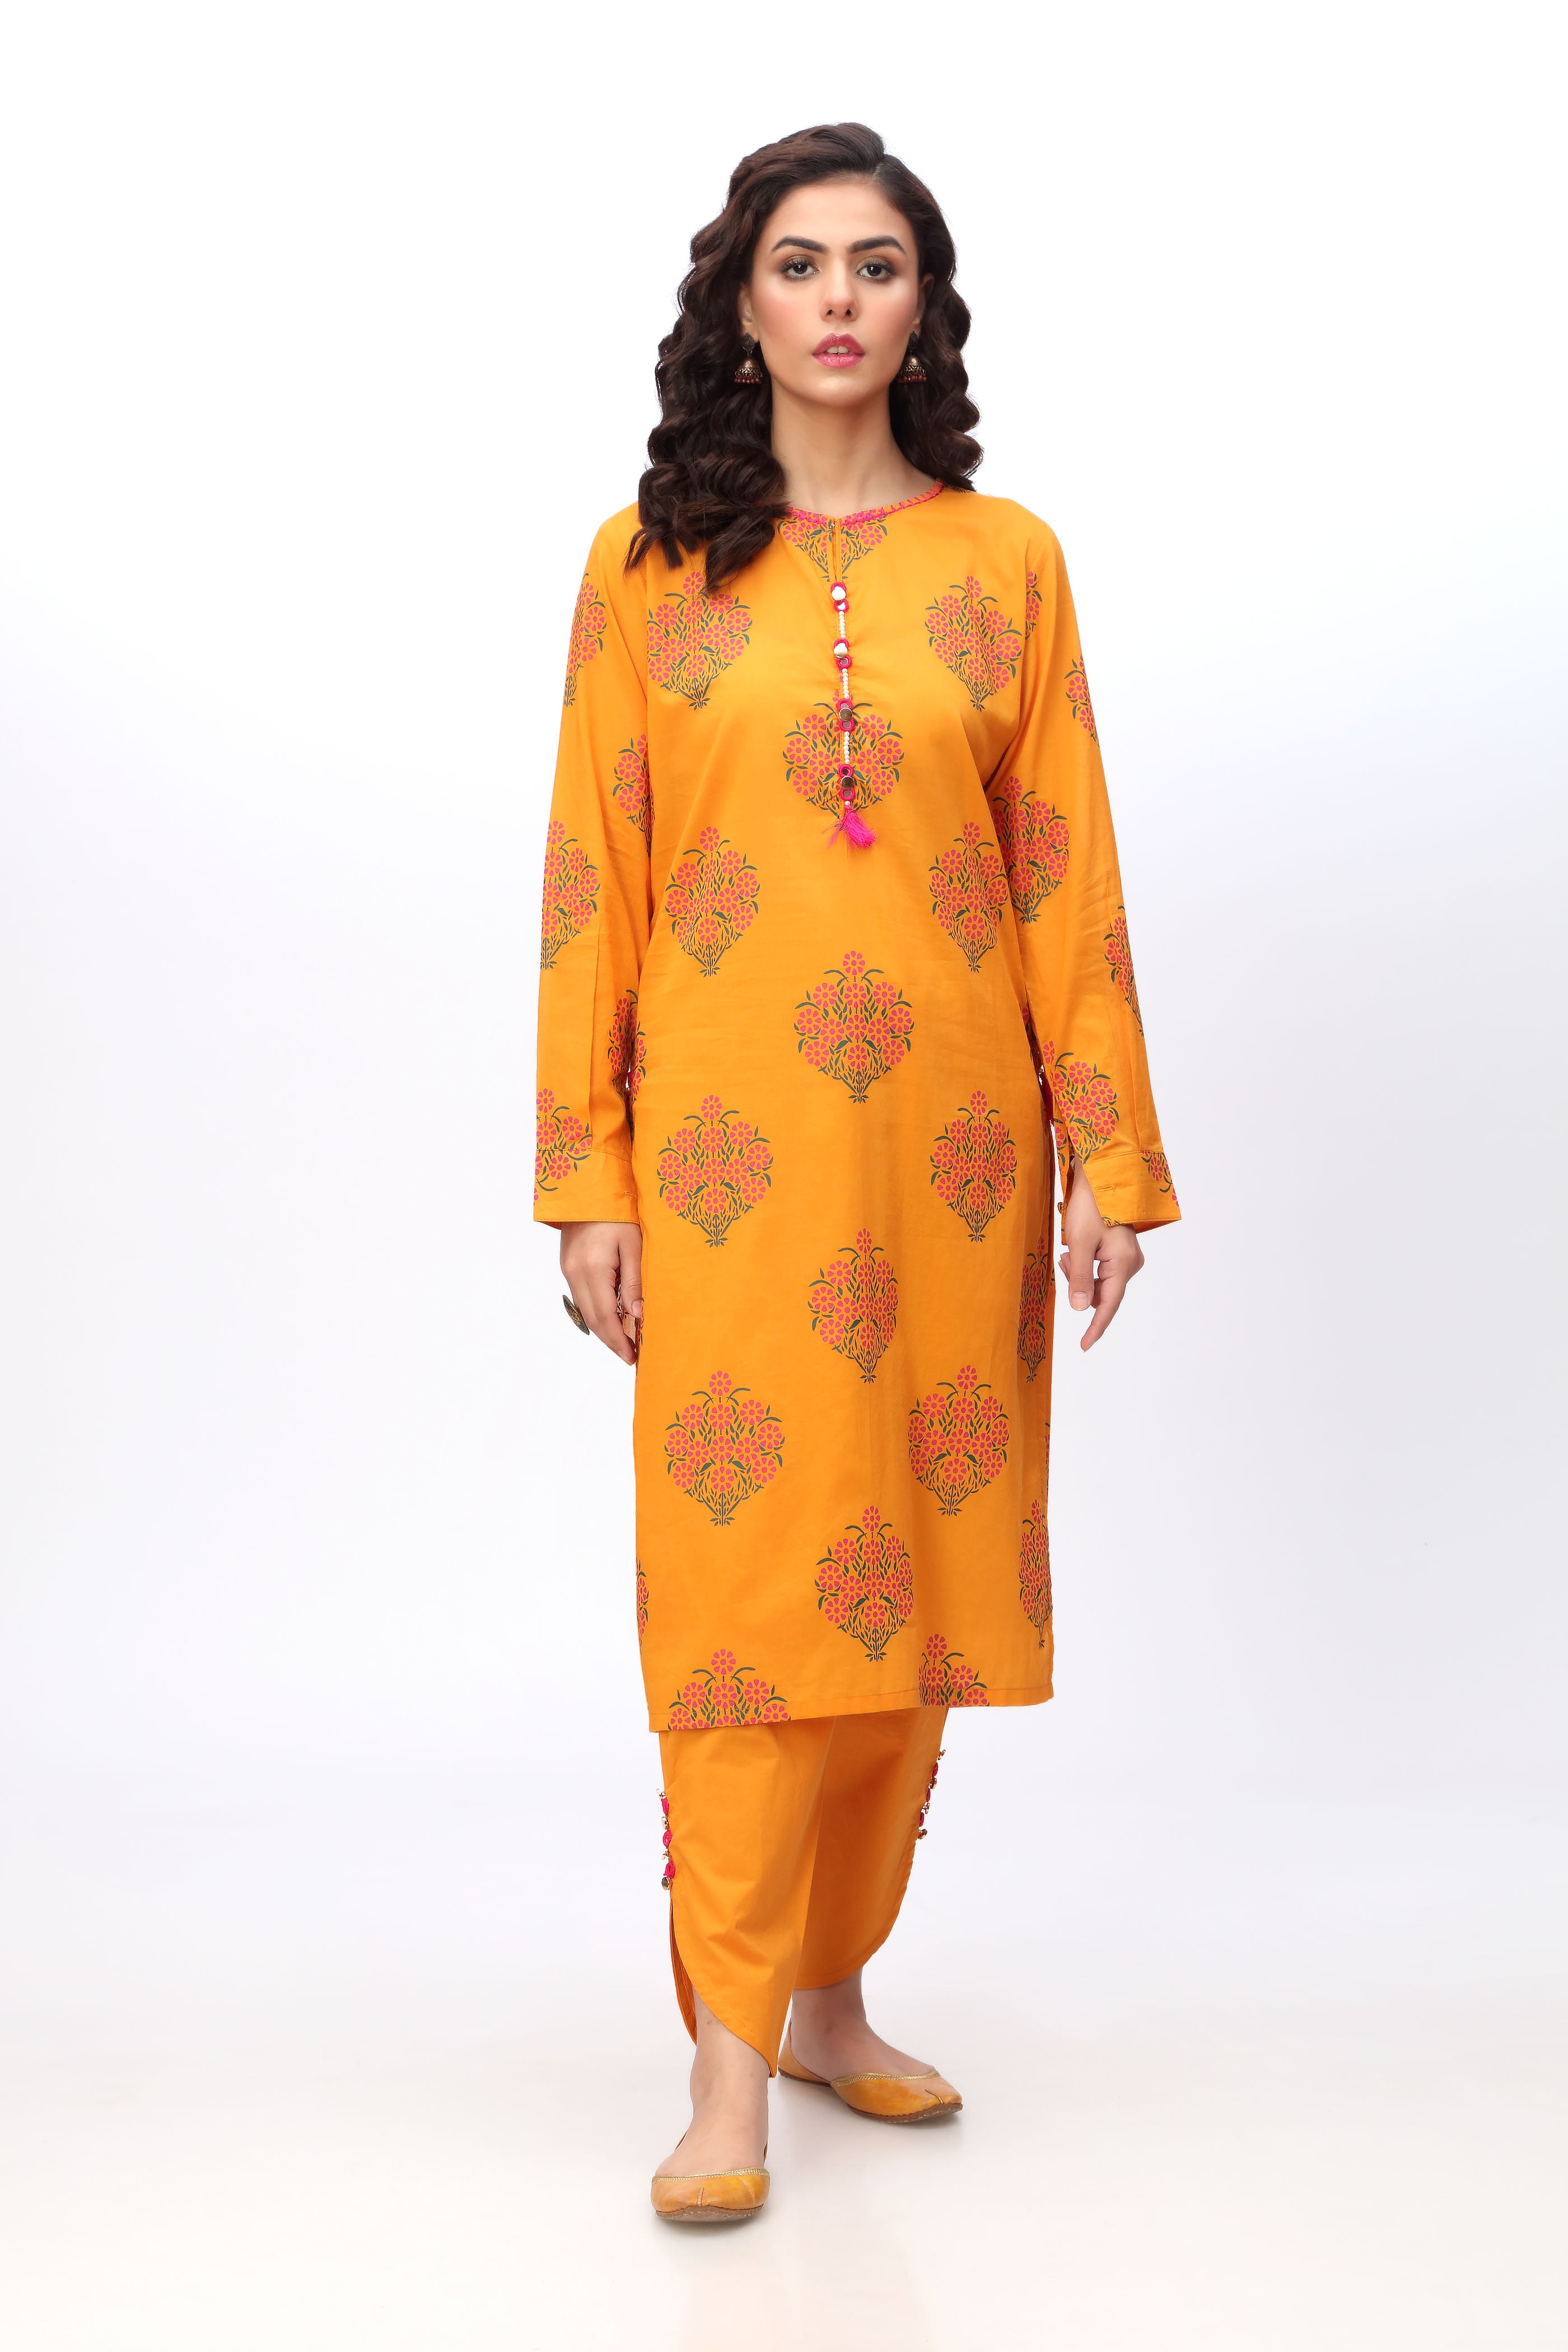 Pink Impression in Mustard coloured Printed Lawn fabric